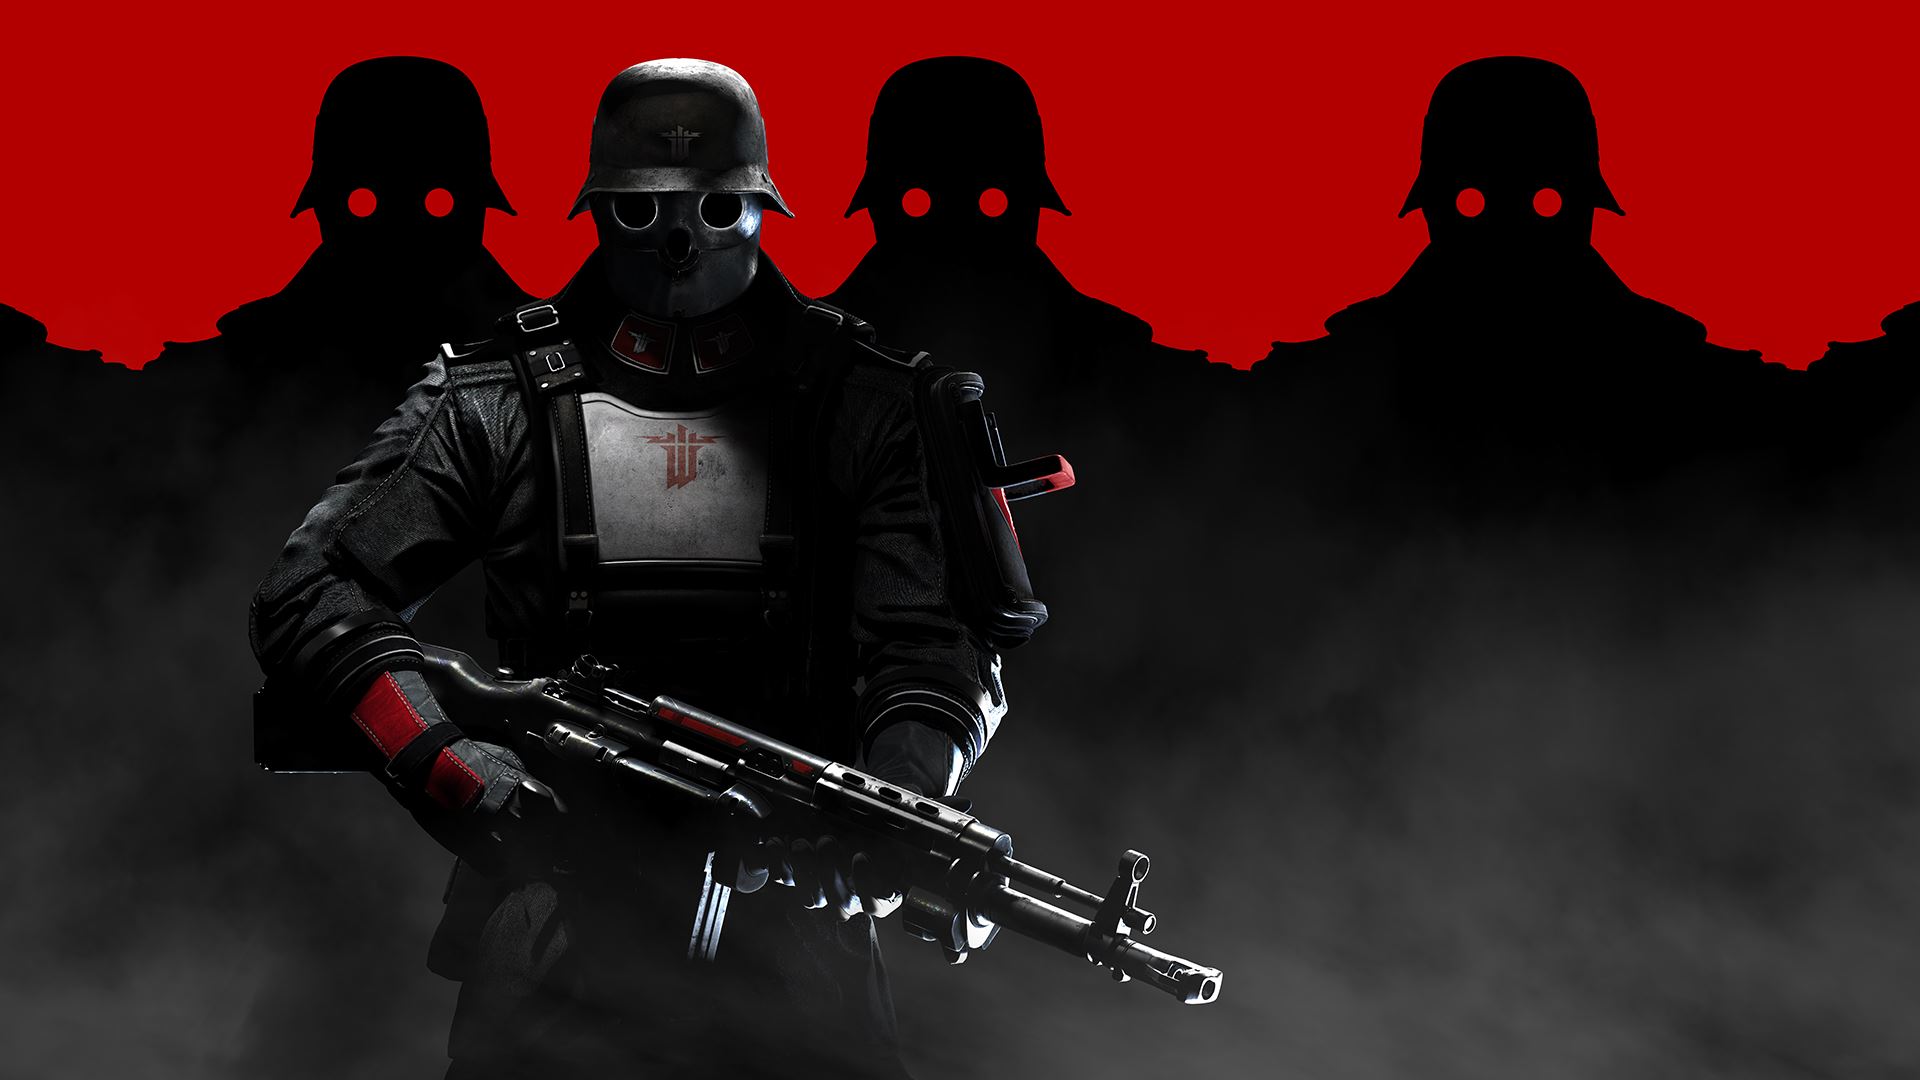 A Wolfenstein sequel may have been hinted at during Bethesda's showcase